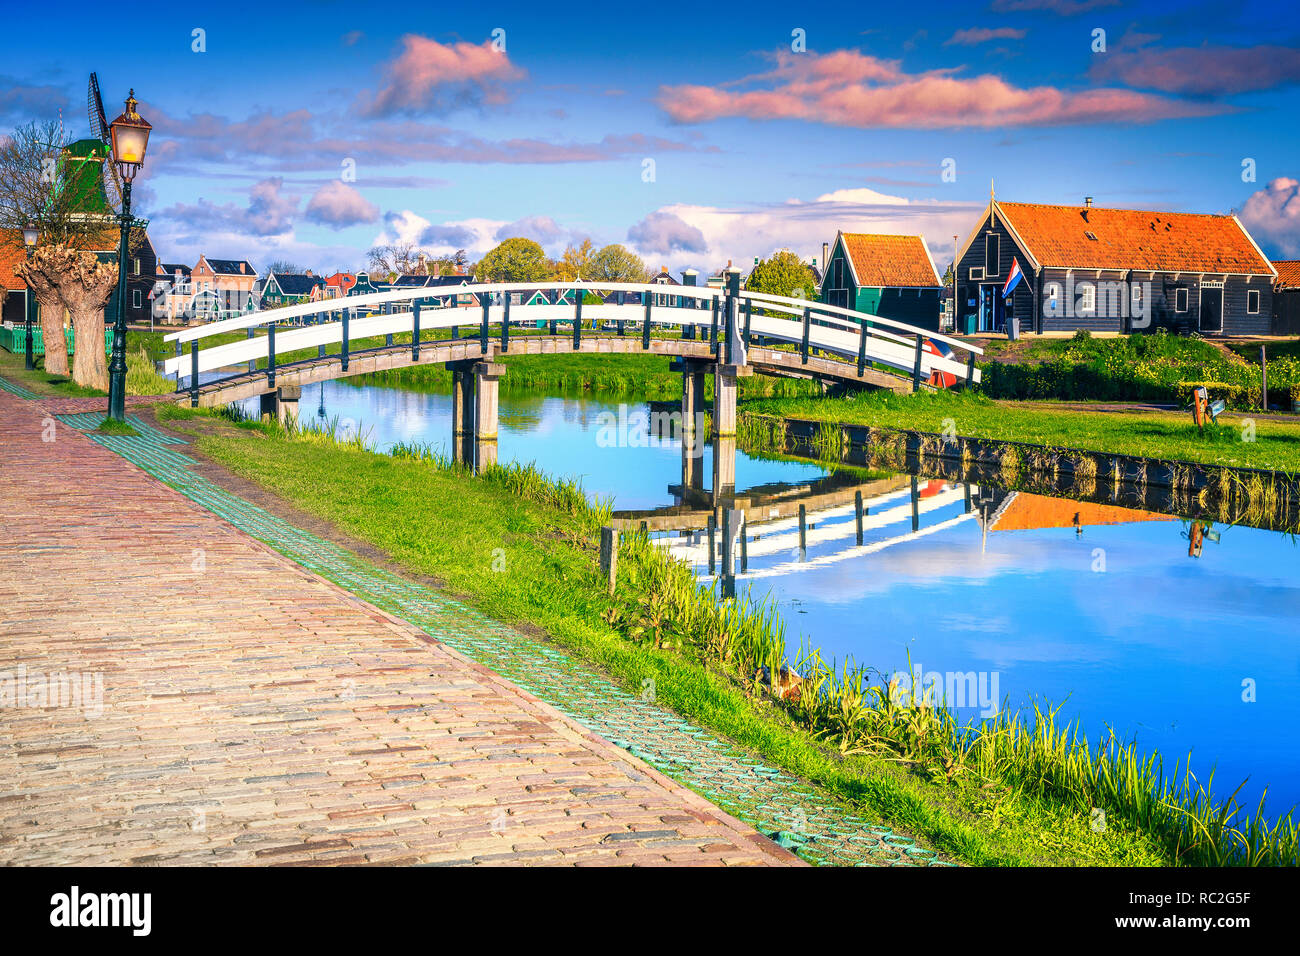 Amazing dutch travel destination. Fantastic touristic village museum and recreation place with admirable windmills, water canals, Zaanse Schans, Nethe Stock Photo